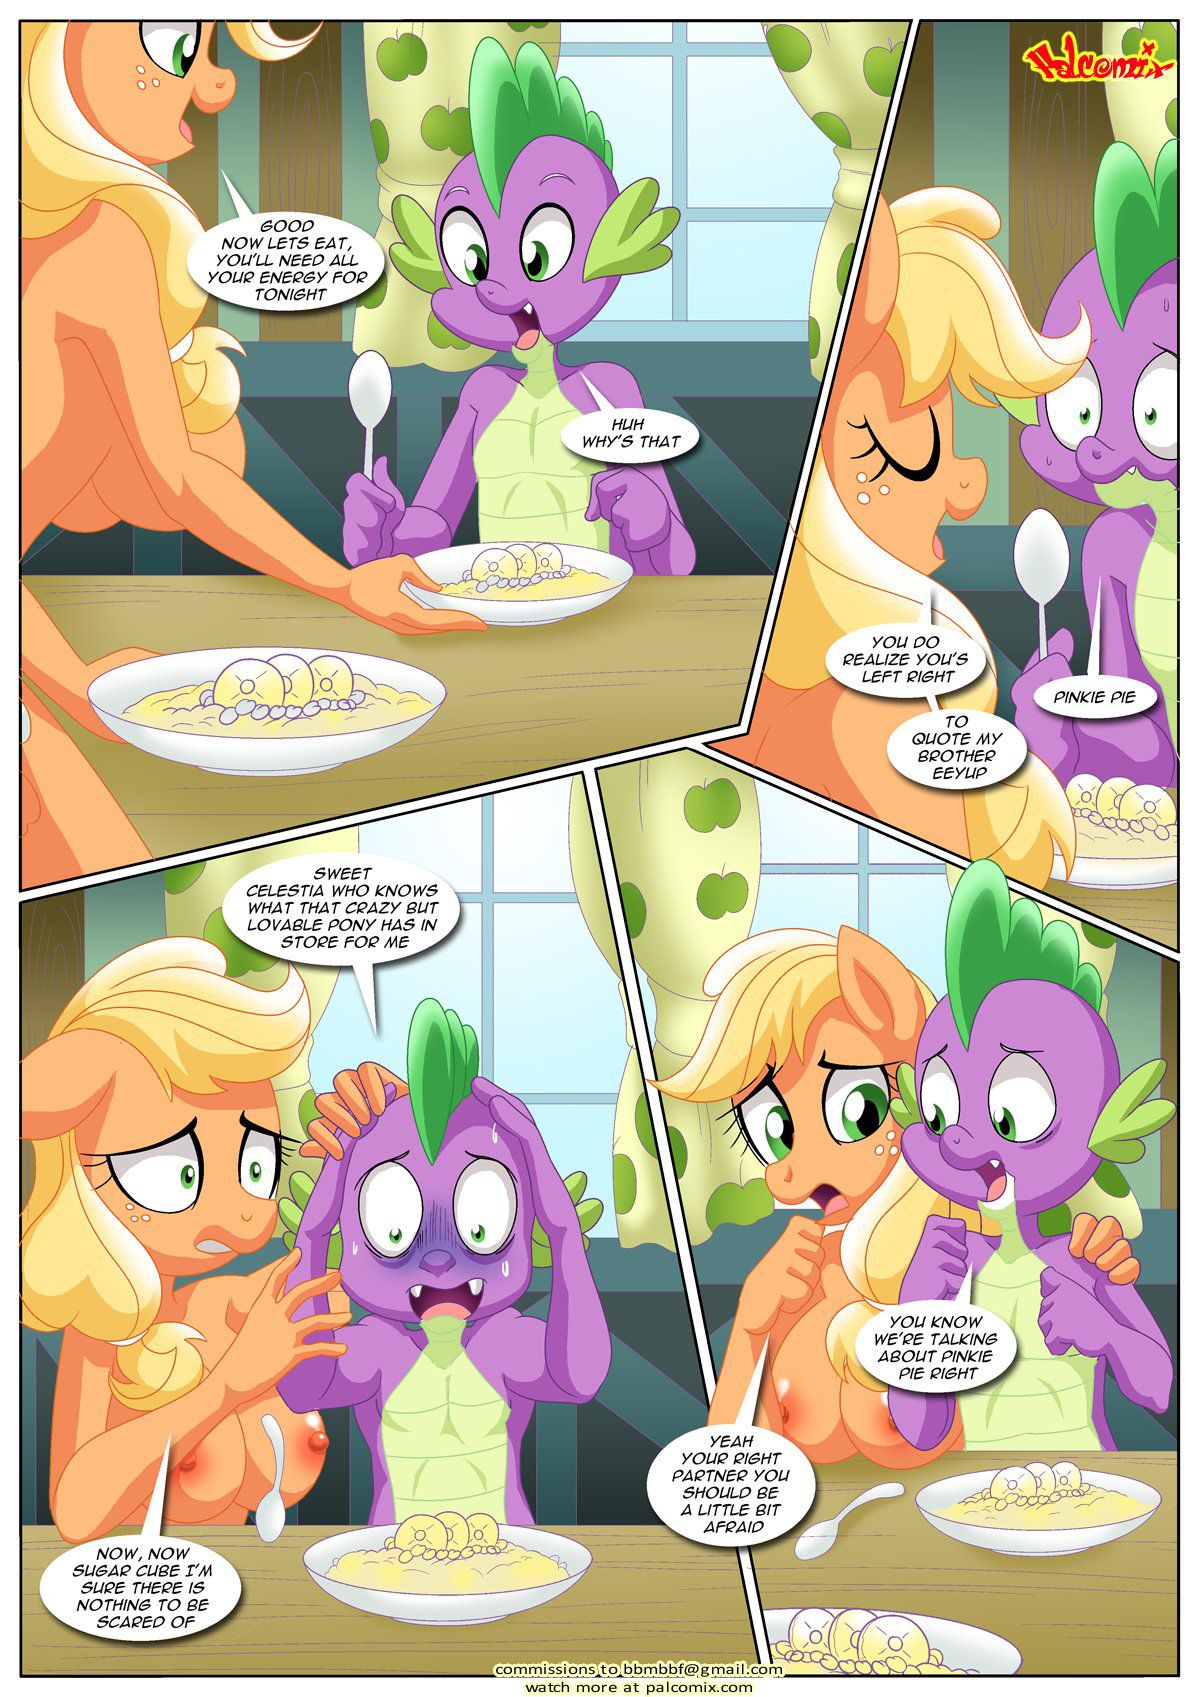 [Palcomix] Pinkie's Playhouse (My Little Pony Friendship Is Magic) [Ongoing] 7